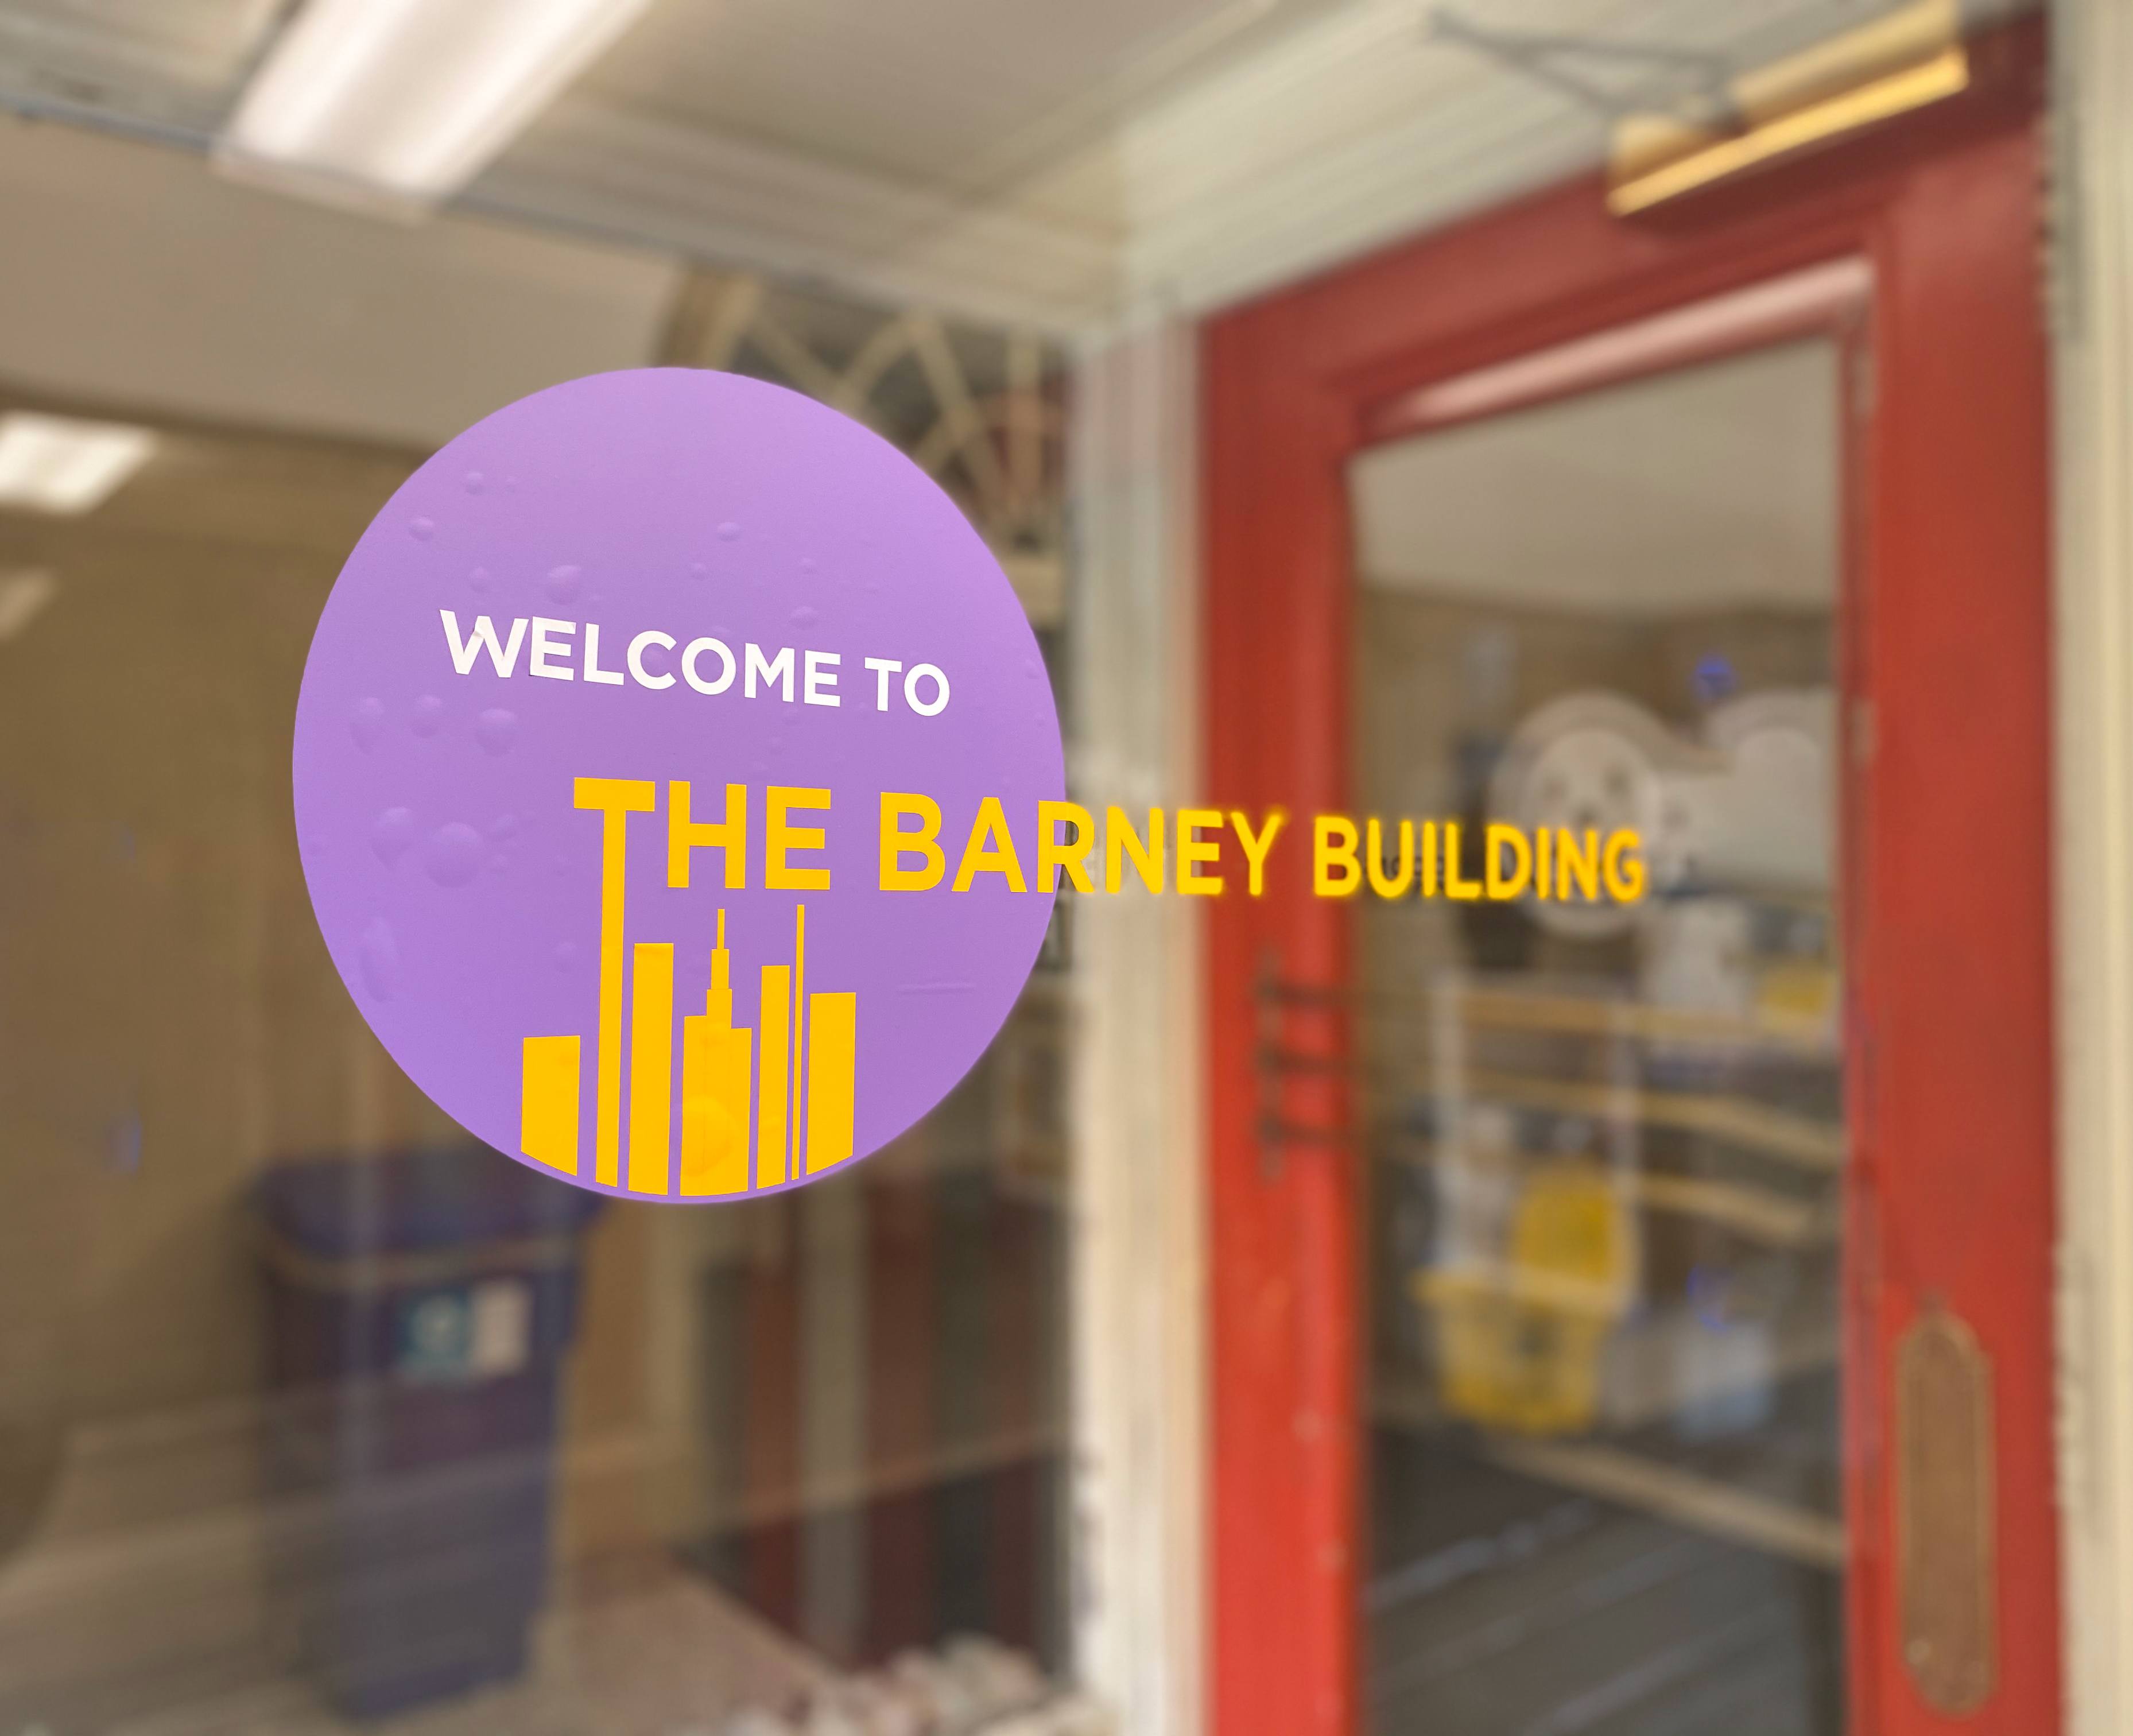 Entrance of the Barney Building.